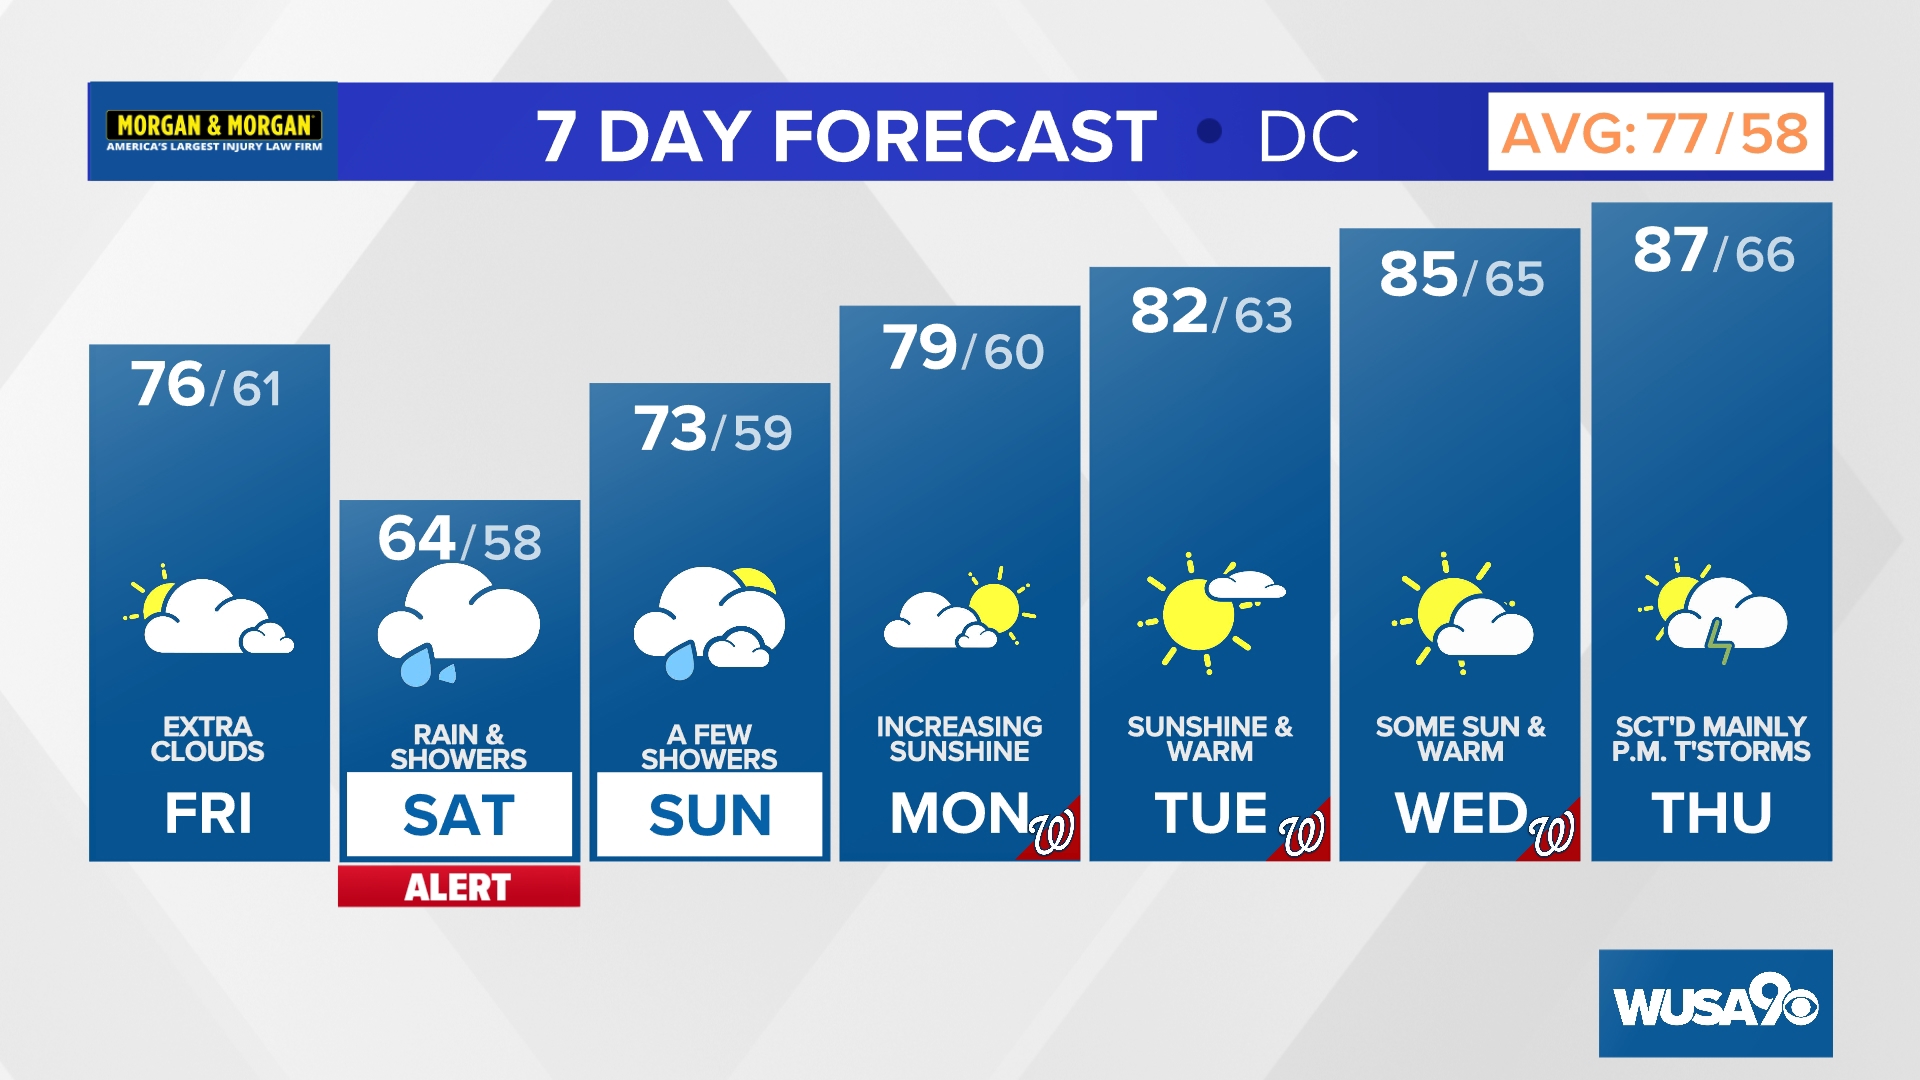 A few spotty showers and even an isolated storm or two will move in Friday afternoon mainly north and west of D.C. Most of the wet weather will be on Saturday.